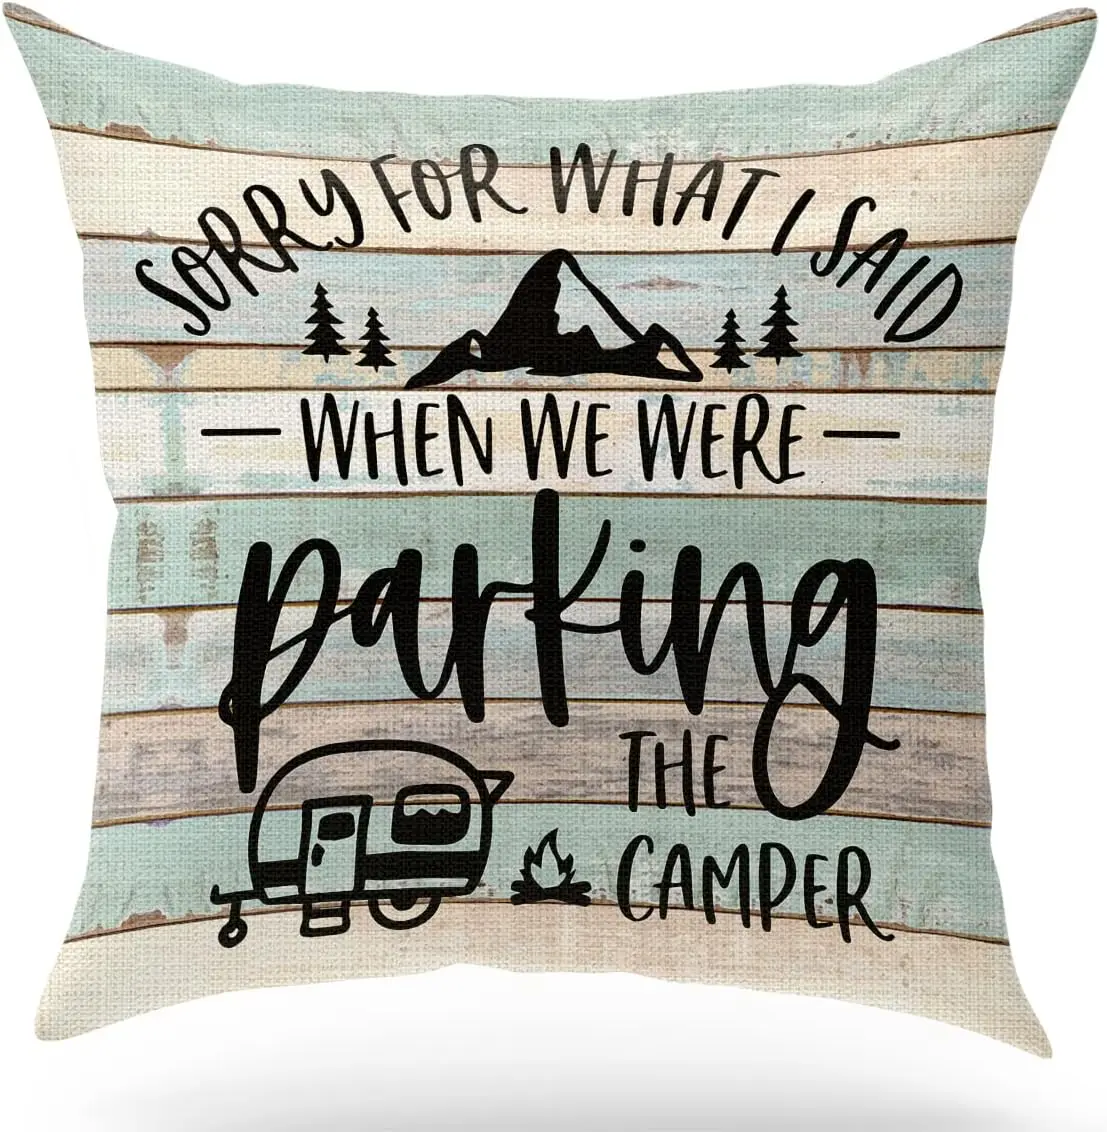 

Throw Pillow Cover, Sorry for What I Said When We were Parking The Camper, Outdoor Camper Decorative, Pillow Cushion Case